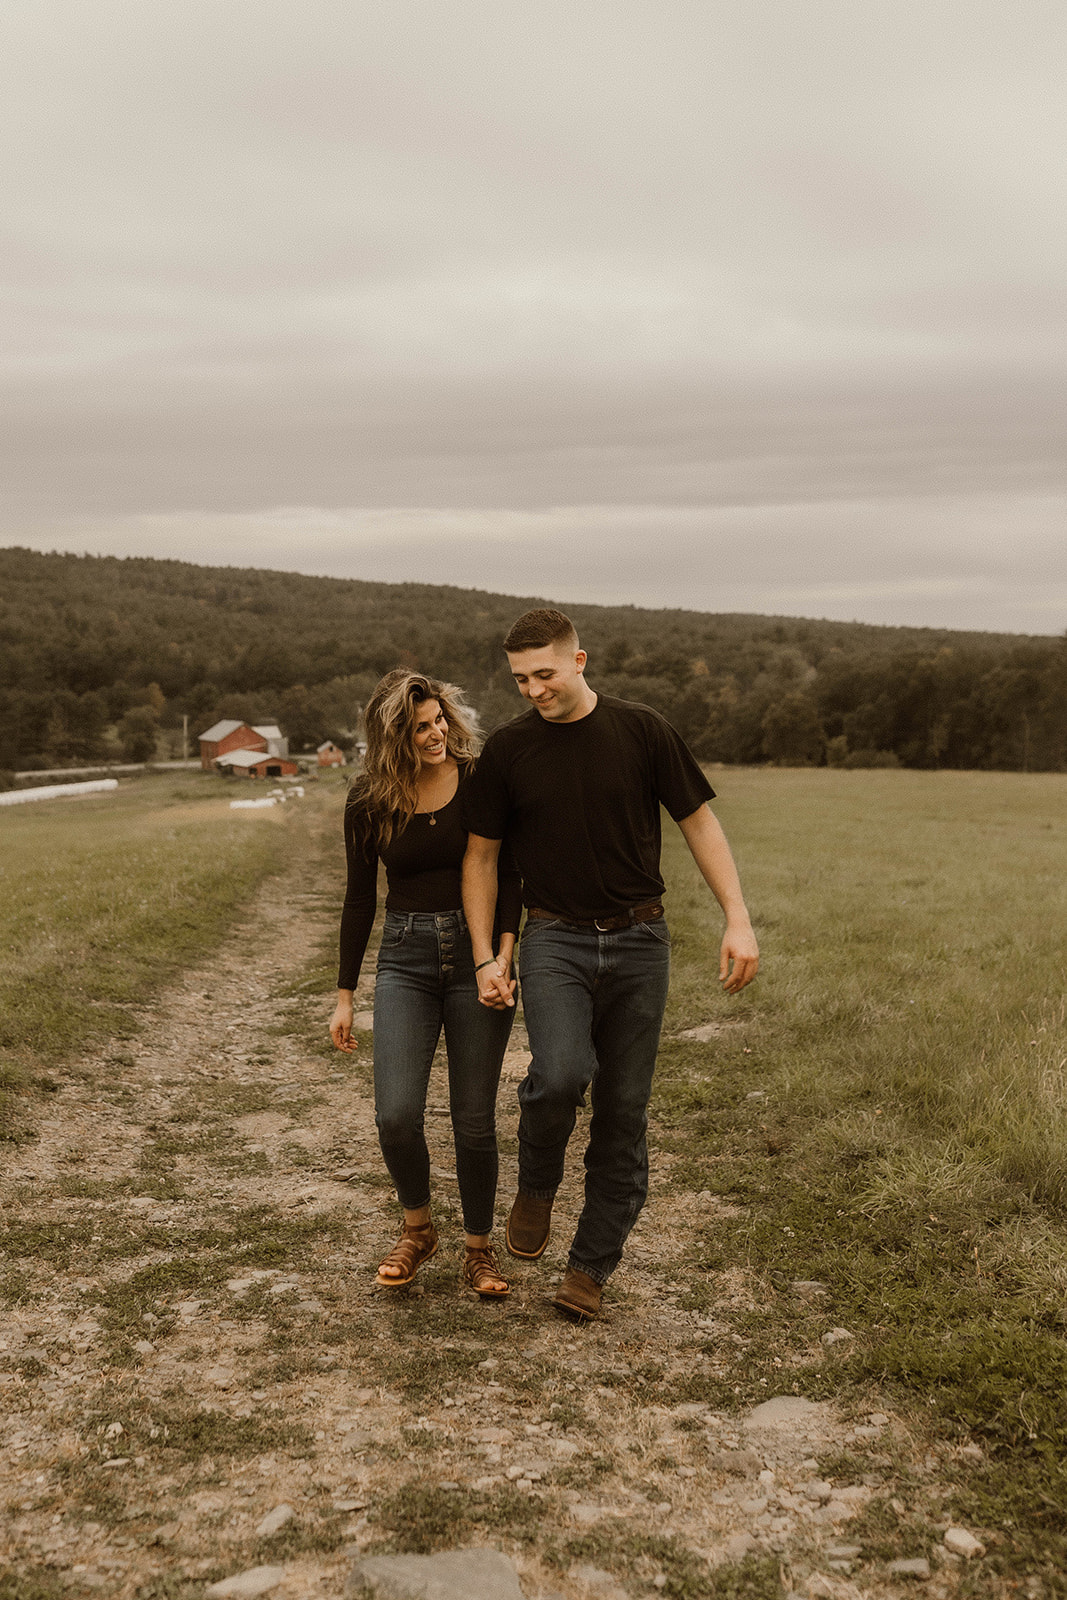 Beautiful couple walk together and sharing a laugh during their dreamy upstate New York engagement photos